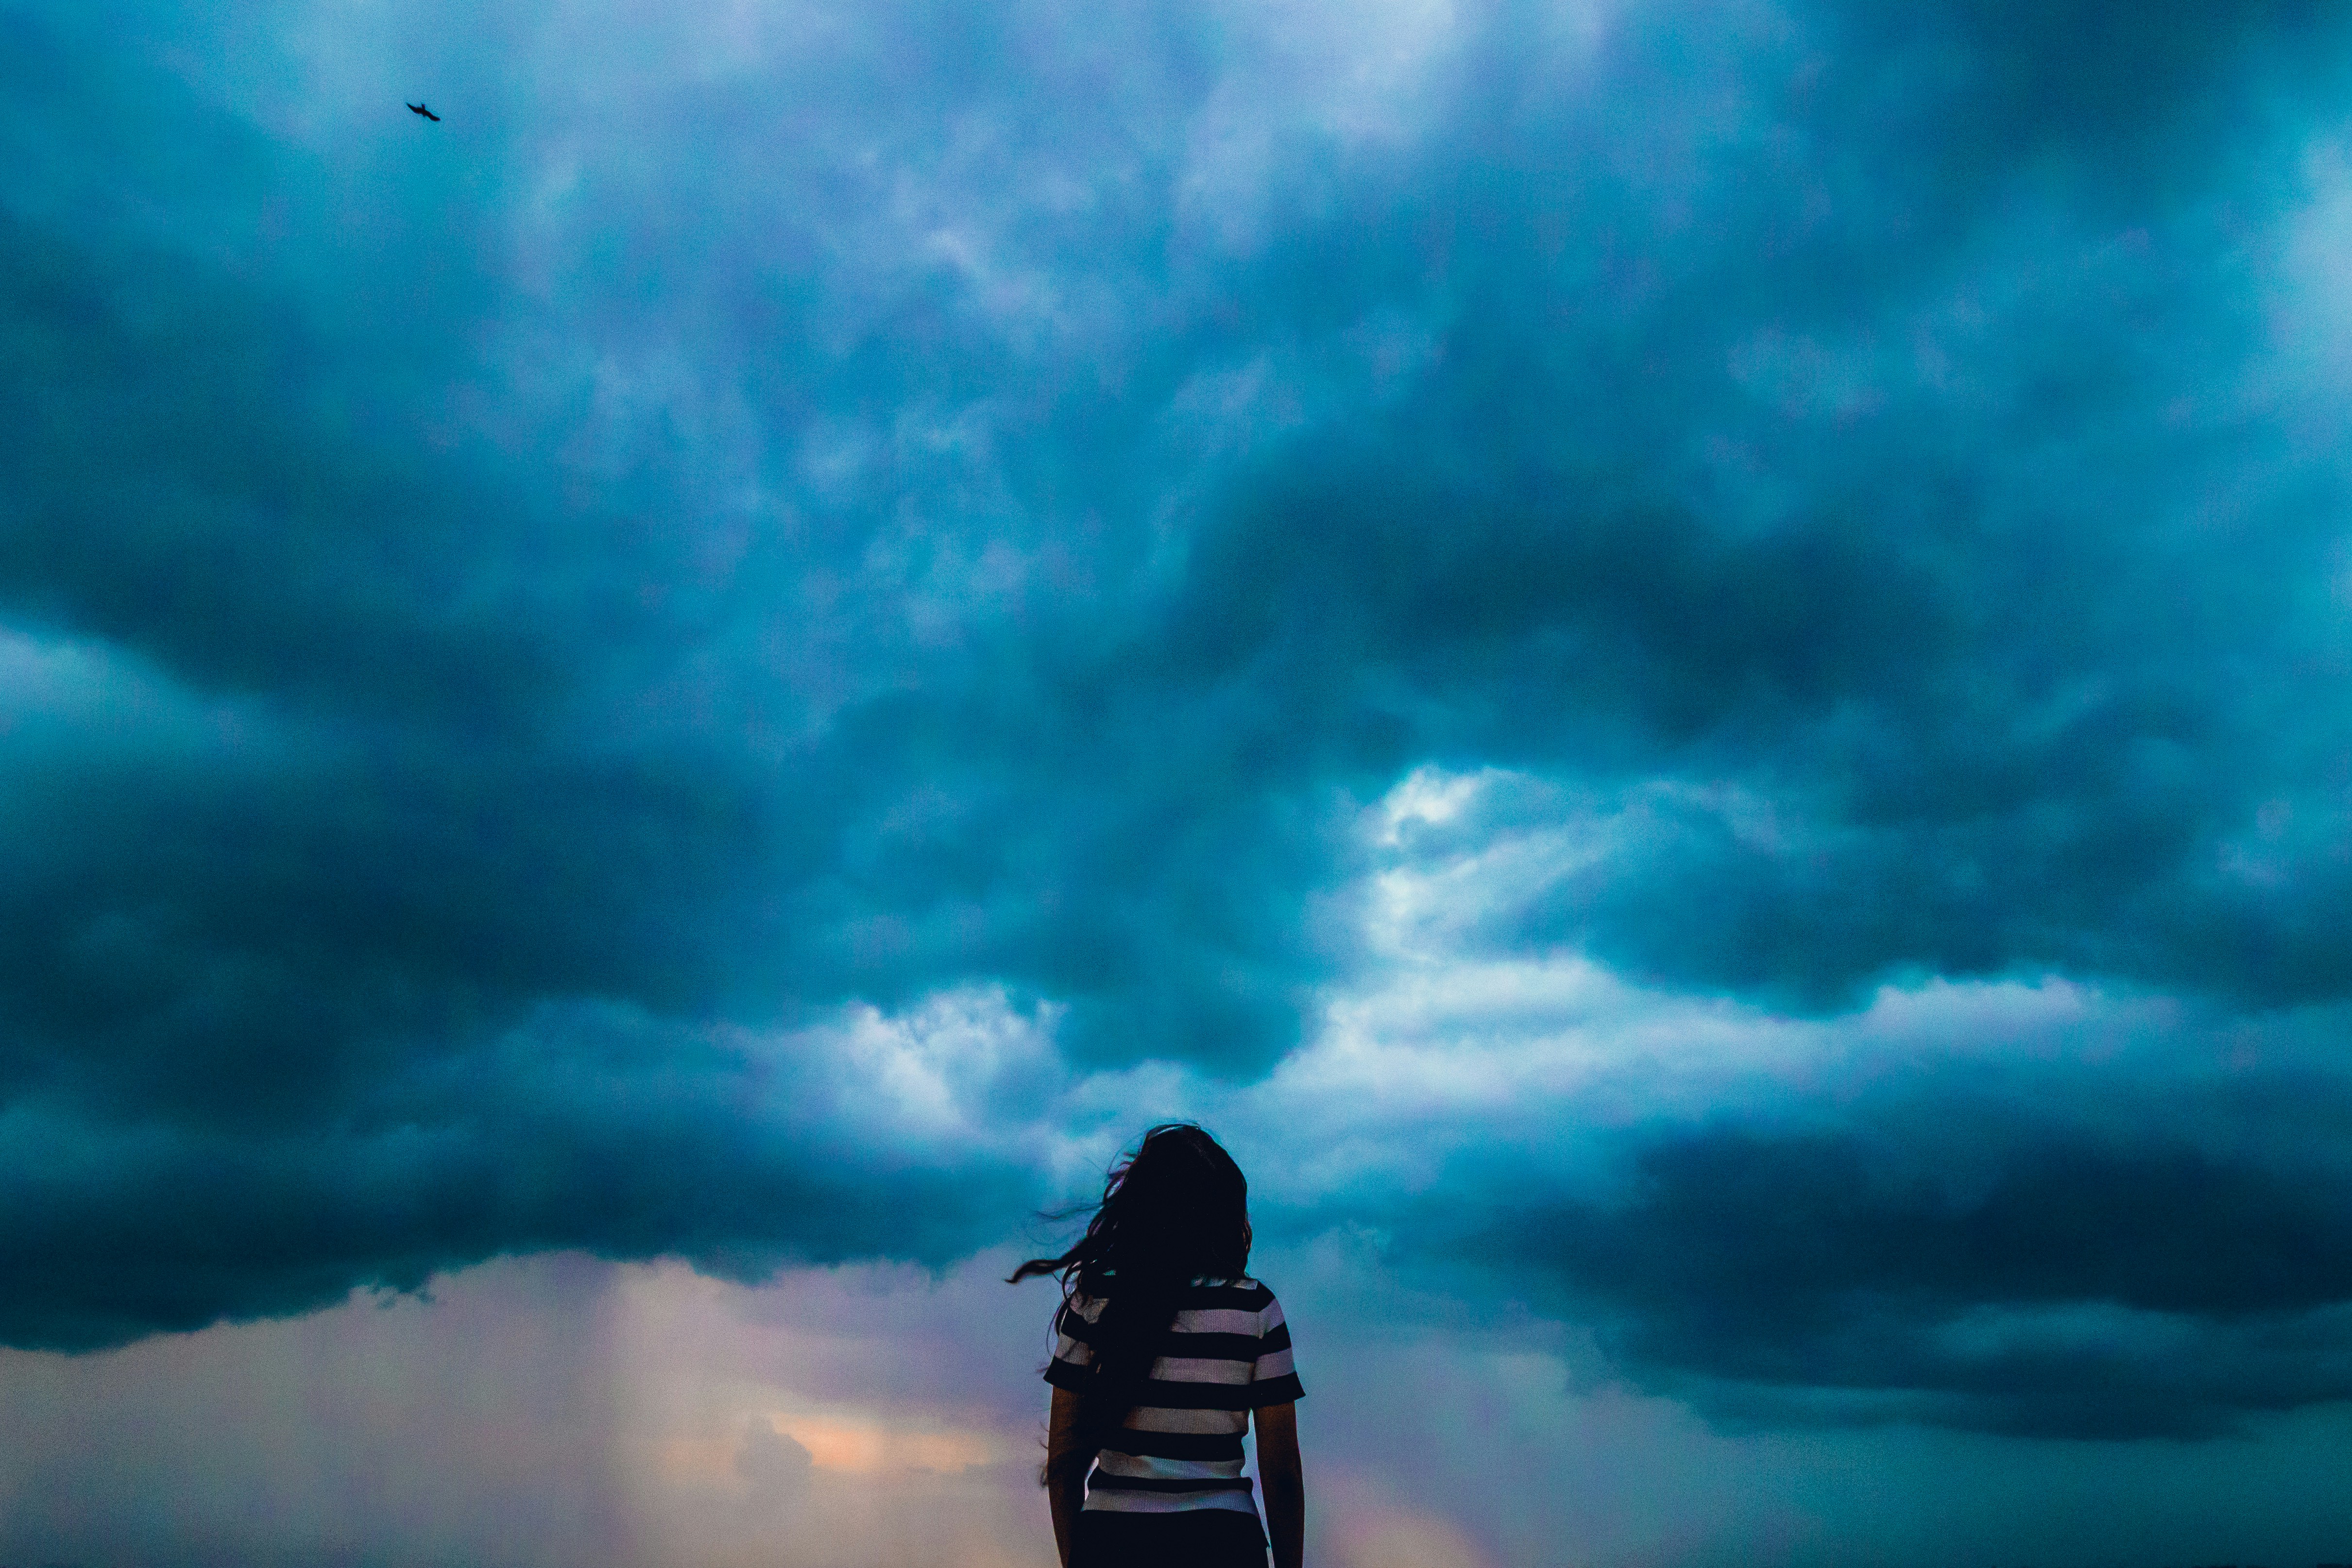 Girl standing under stormy clouds